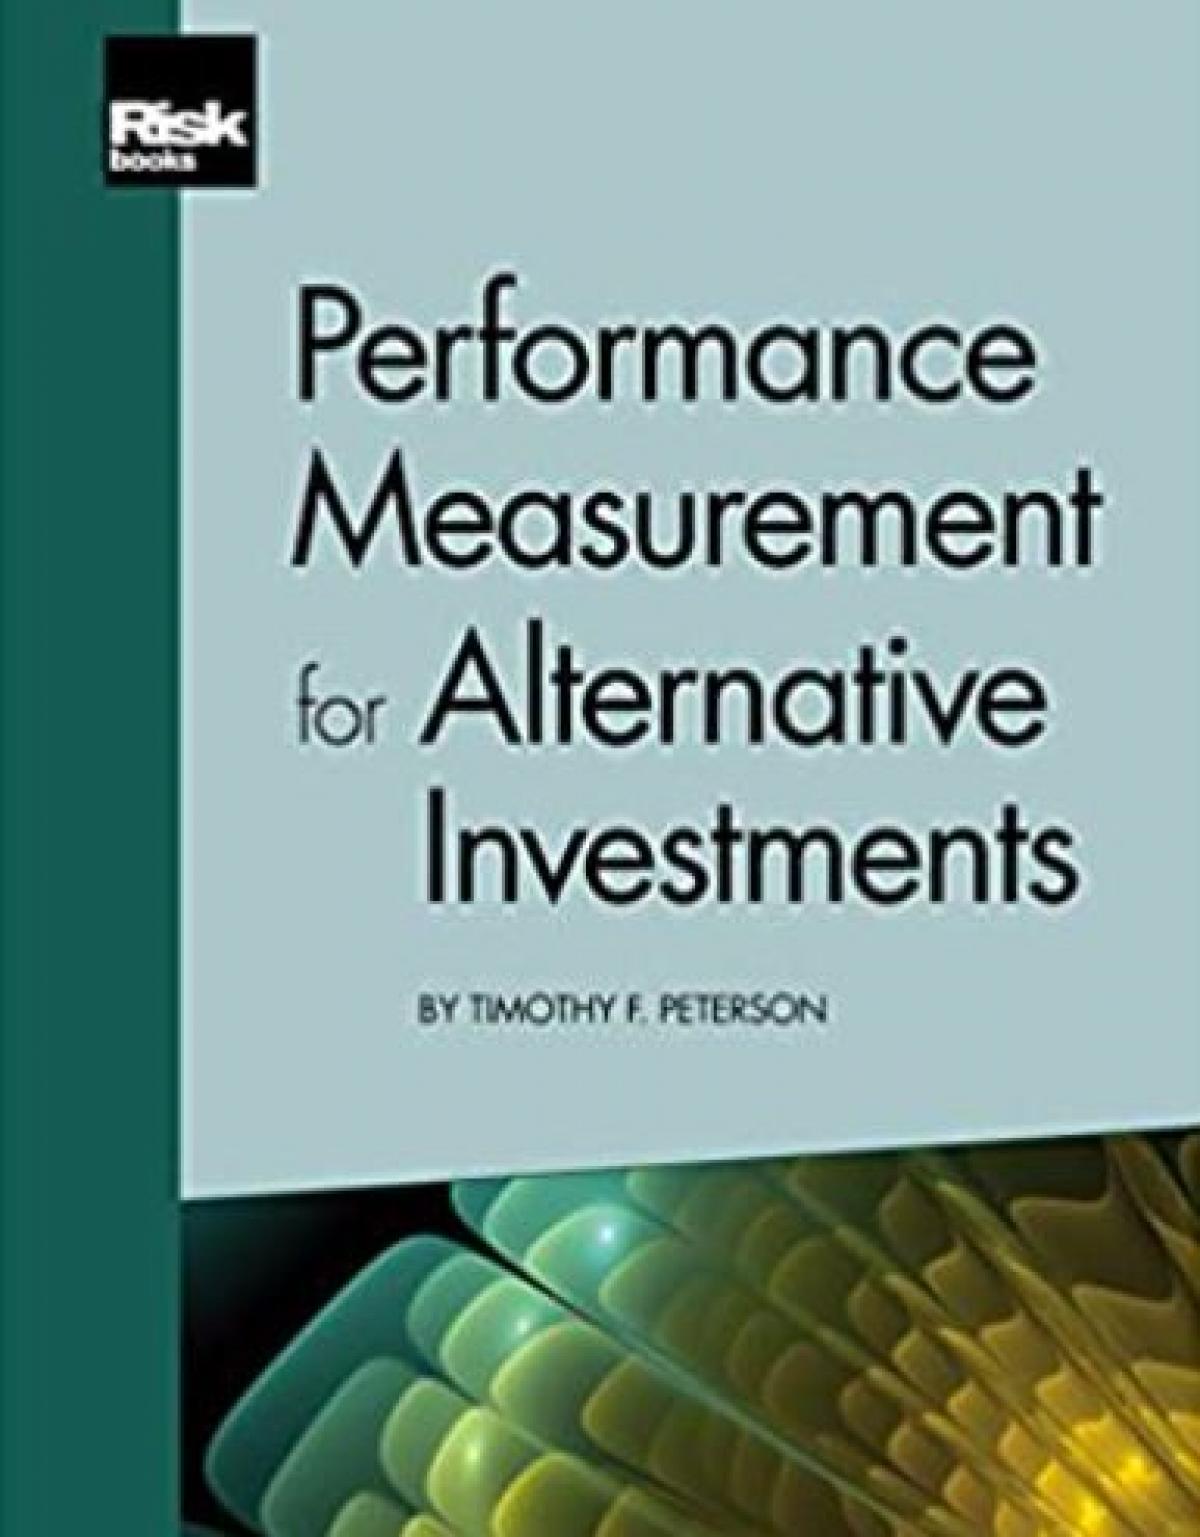 Book Review – Performance Measurement for Alternative Investments by Timothy Peterson